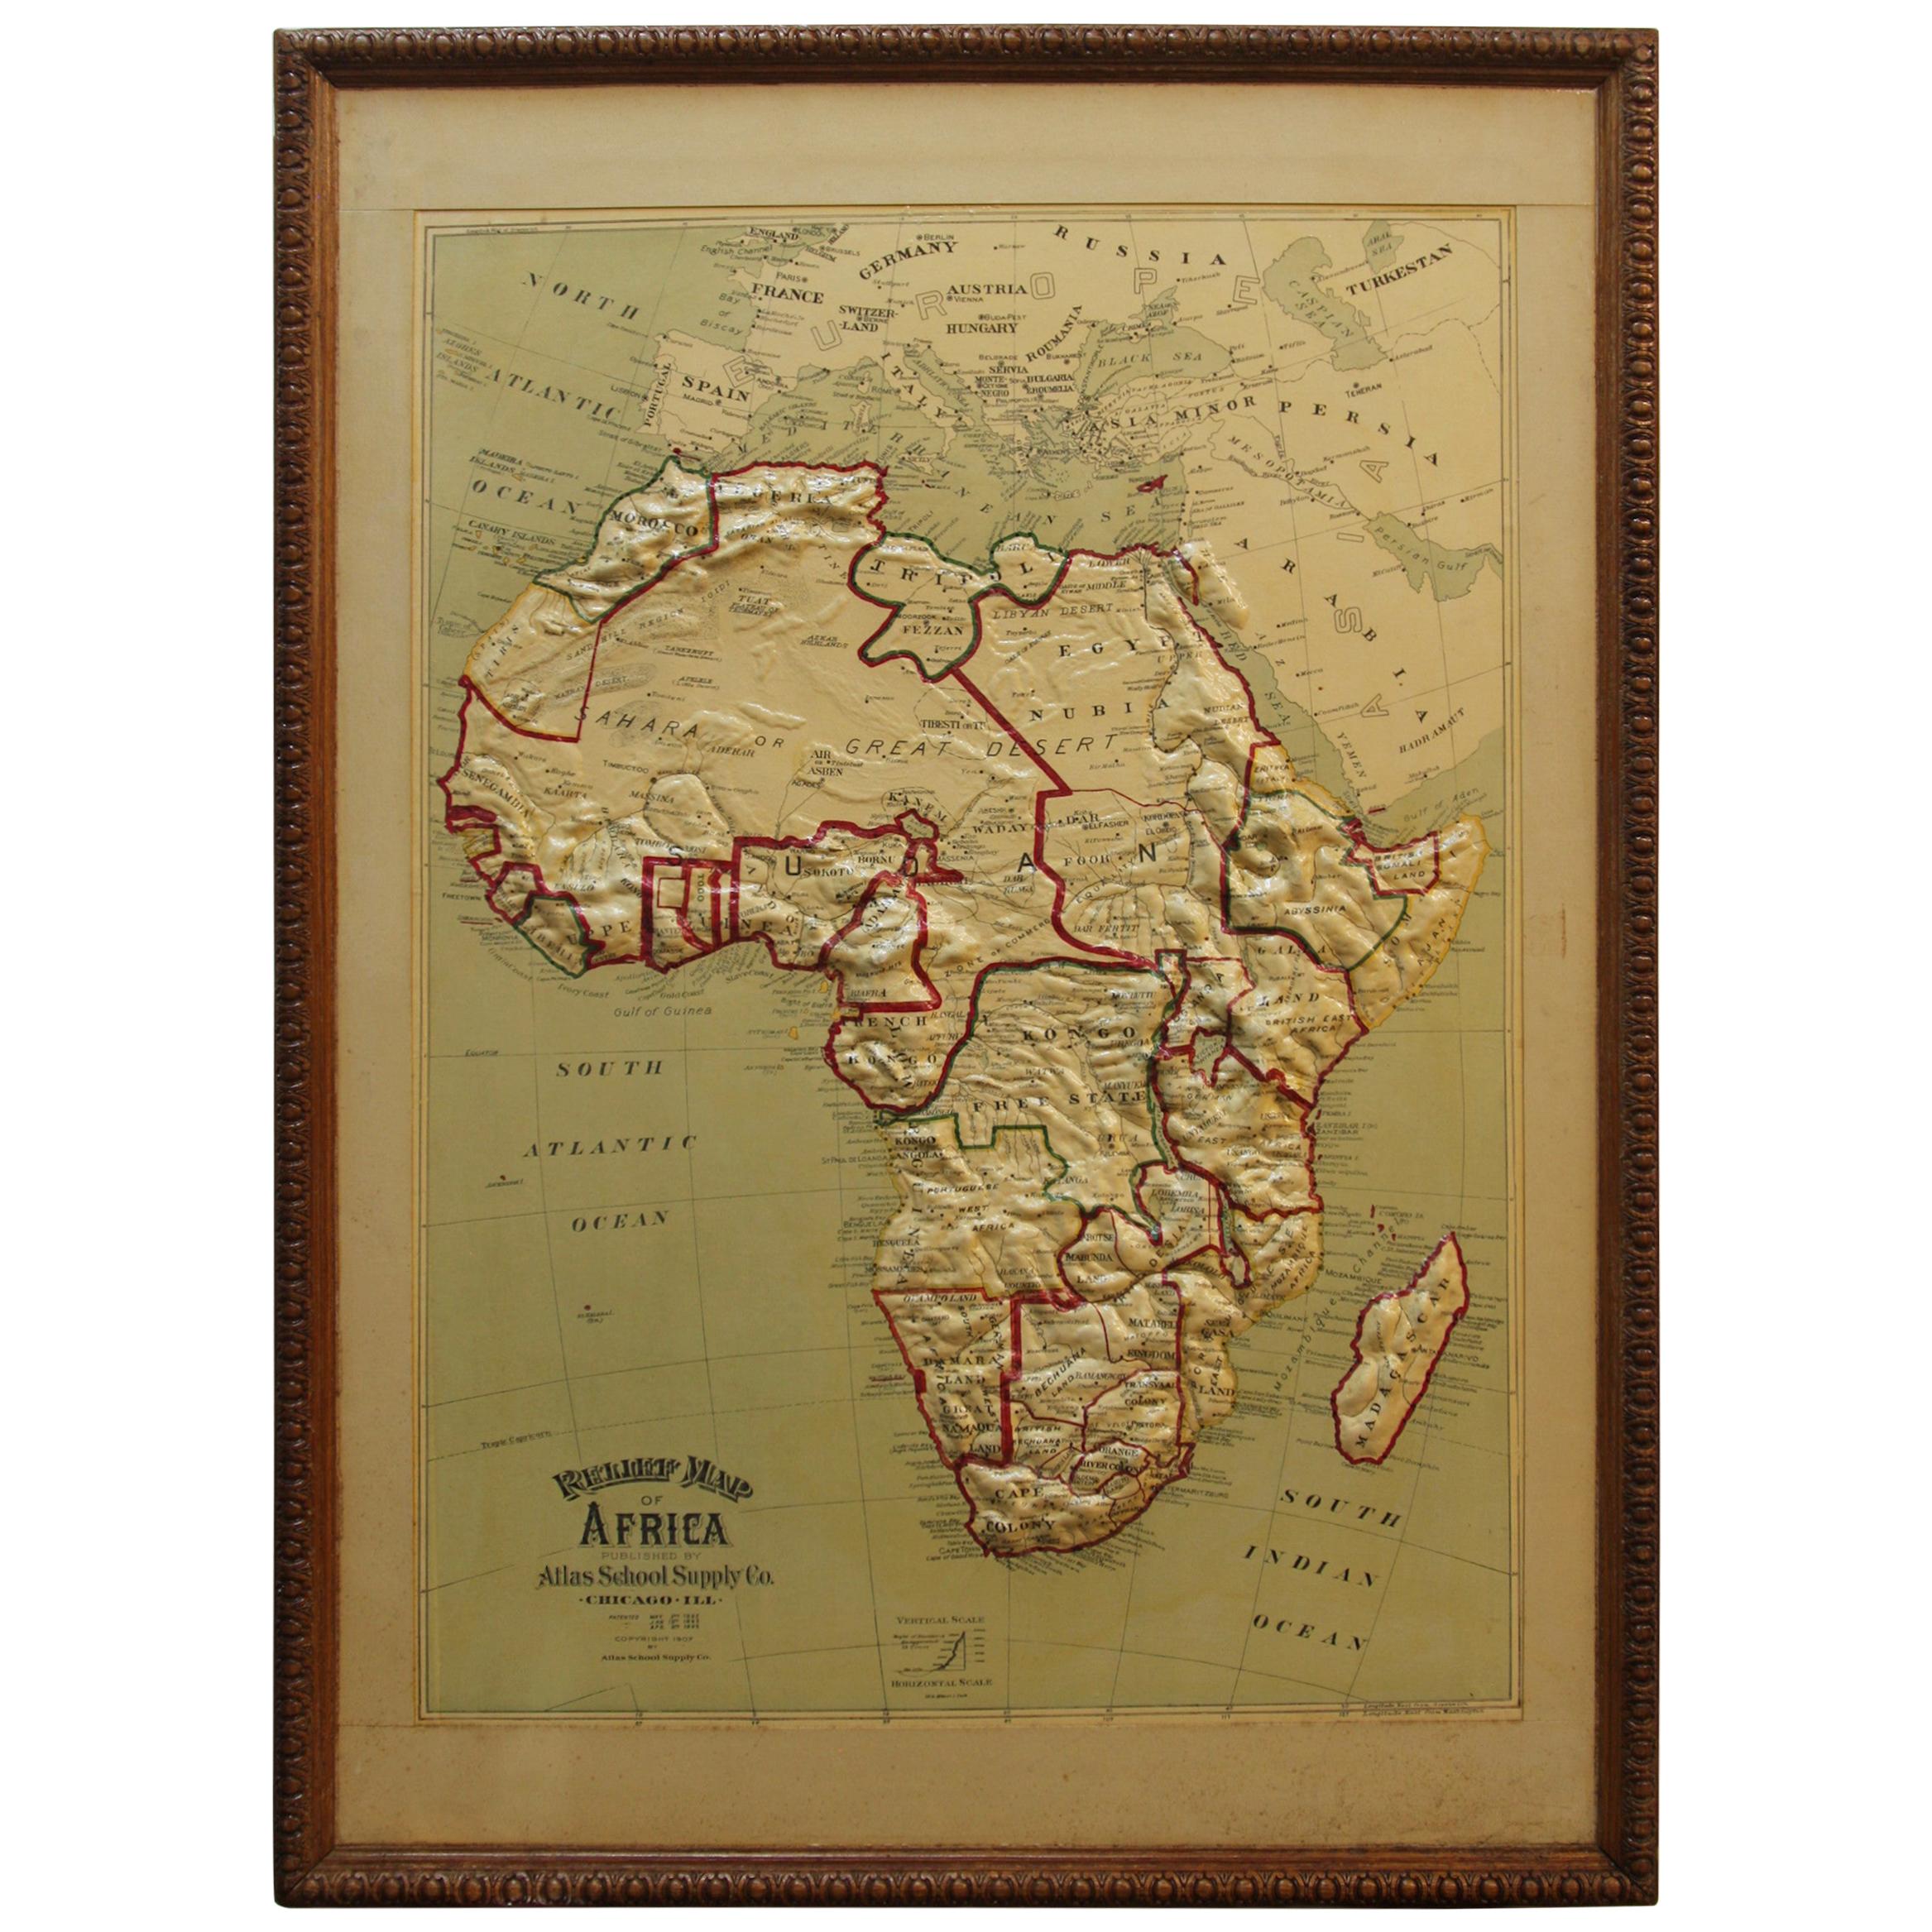 Large 1907 Vintage Relief Map of Africa by Atlas School Supply of Chicago